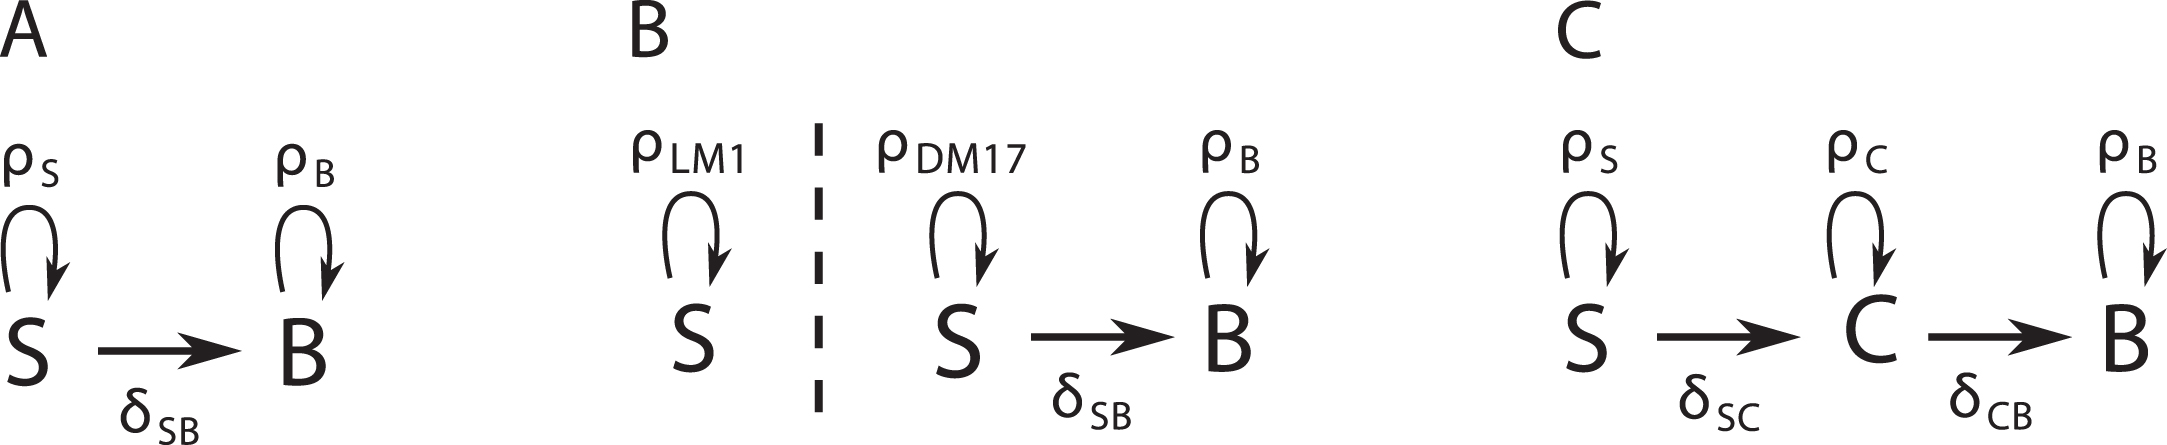 Diagrams of three possible dynamic models for our data. A: The SB model has no intermediary compartment. B: The S2B model has no intermediary compartment, but the self-renewing cells change proliferation rate in DM17. C: The SCB model has an intermediary compartment.